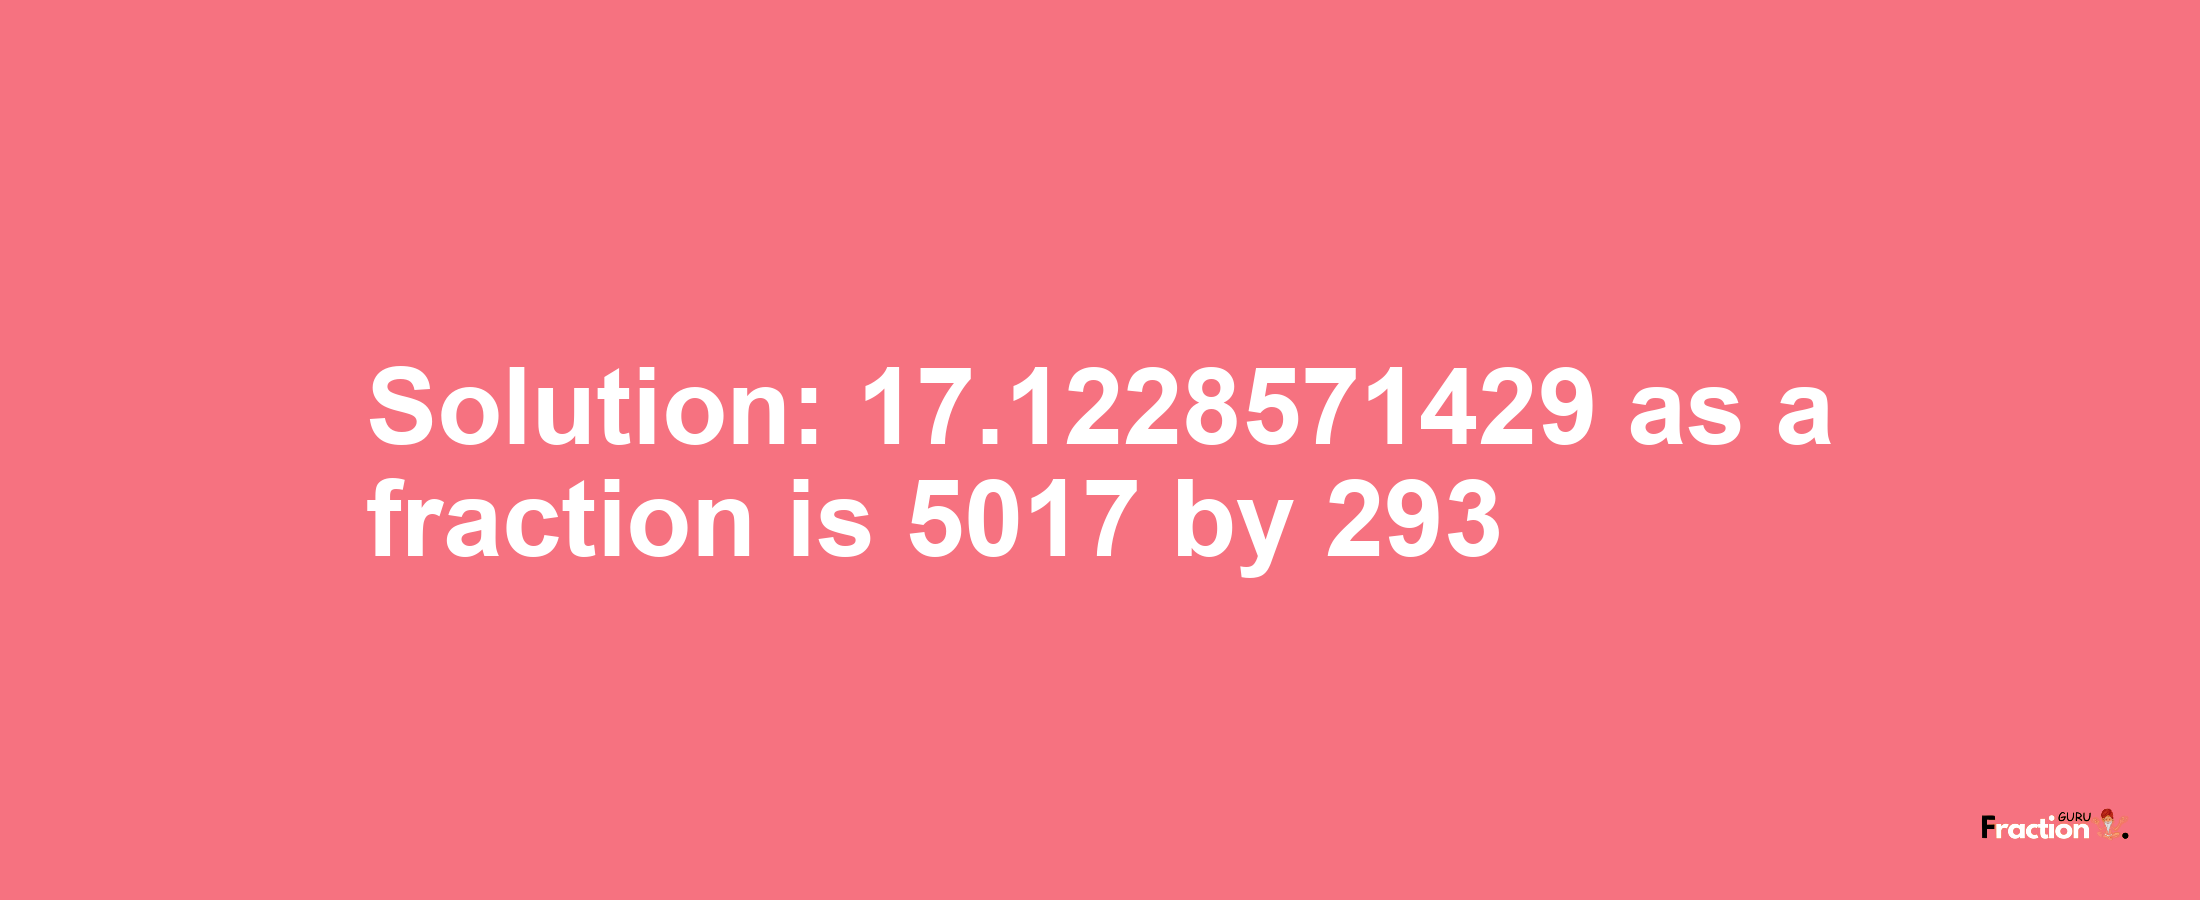 Solution:17.1228571429 as a fraction is 5017/293